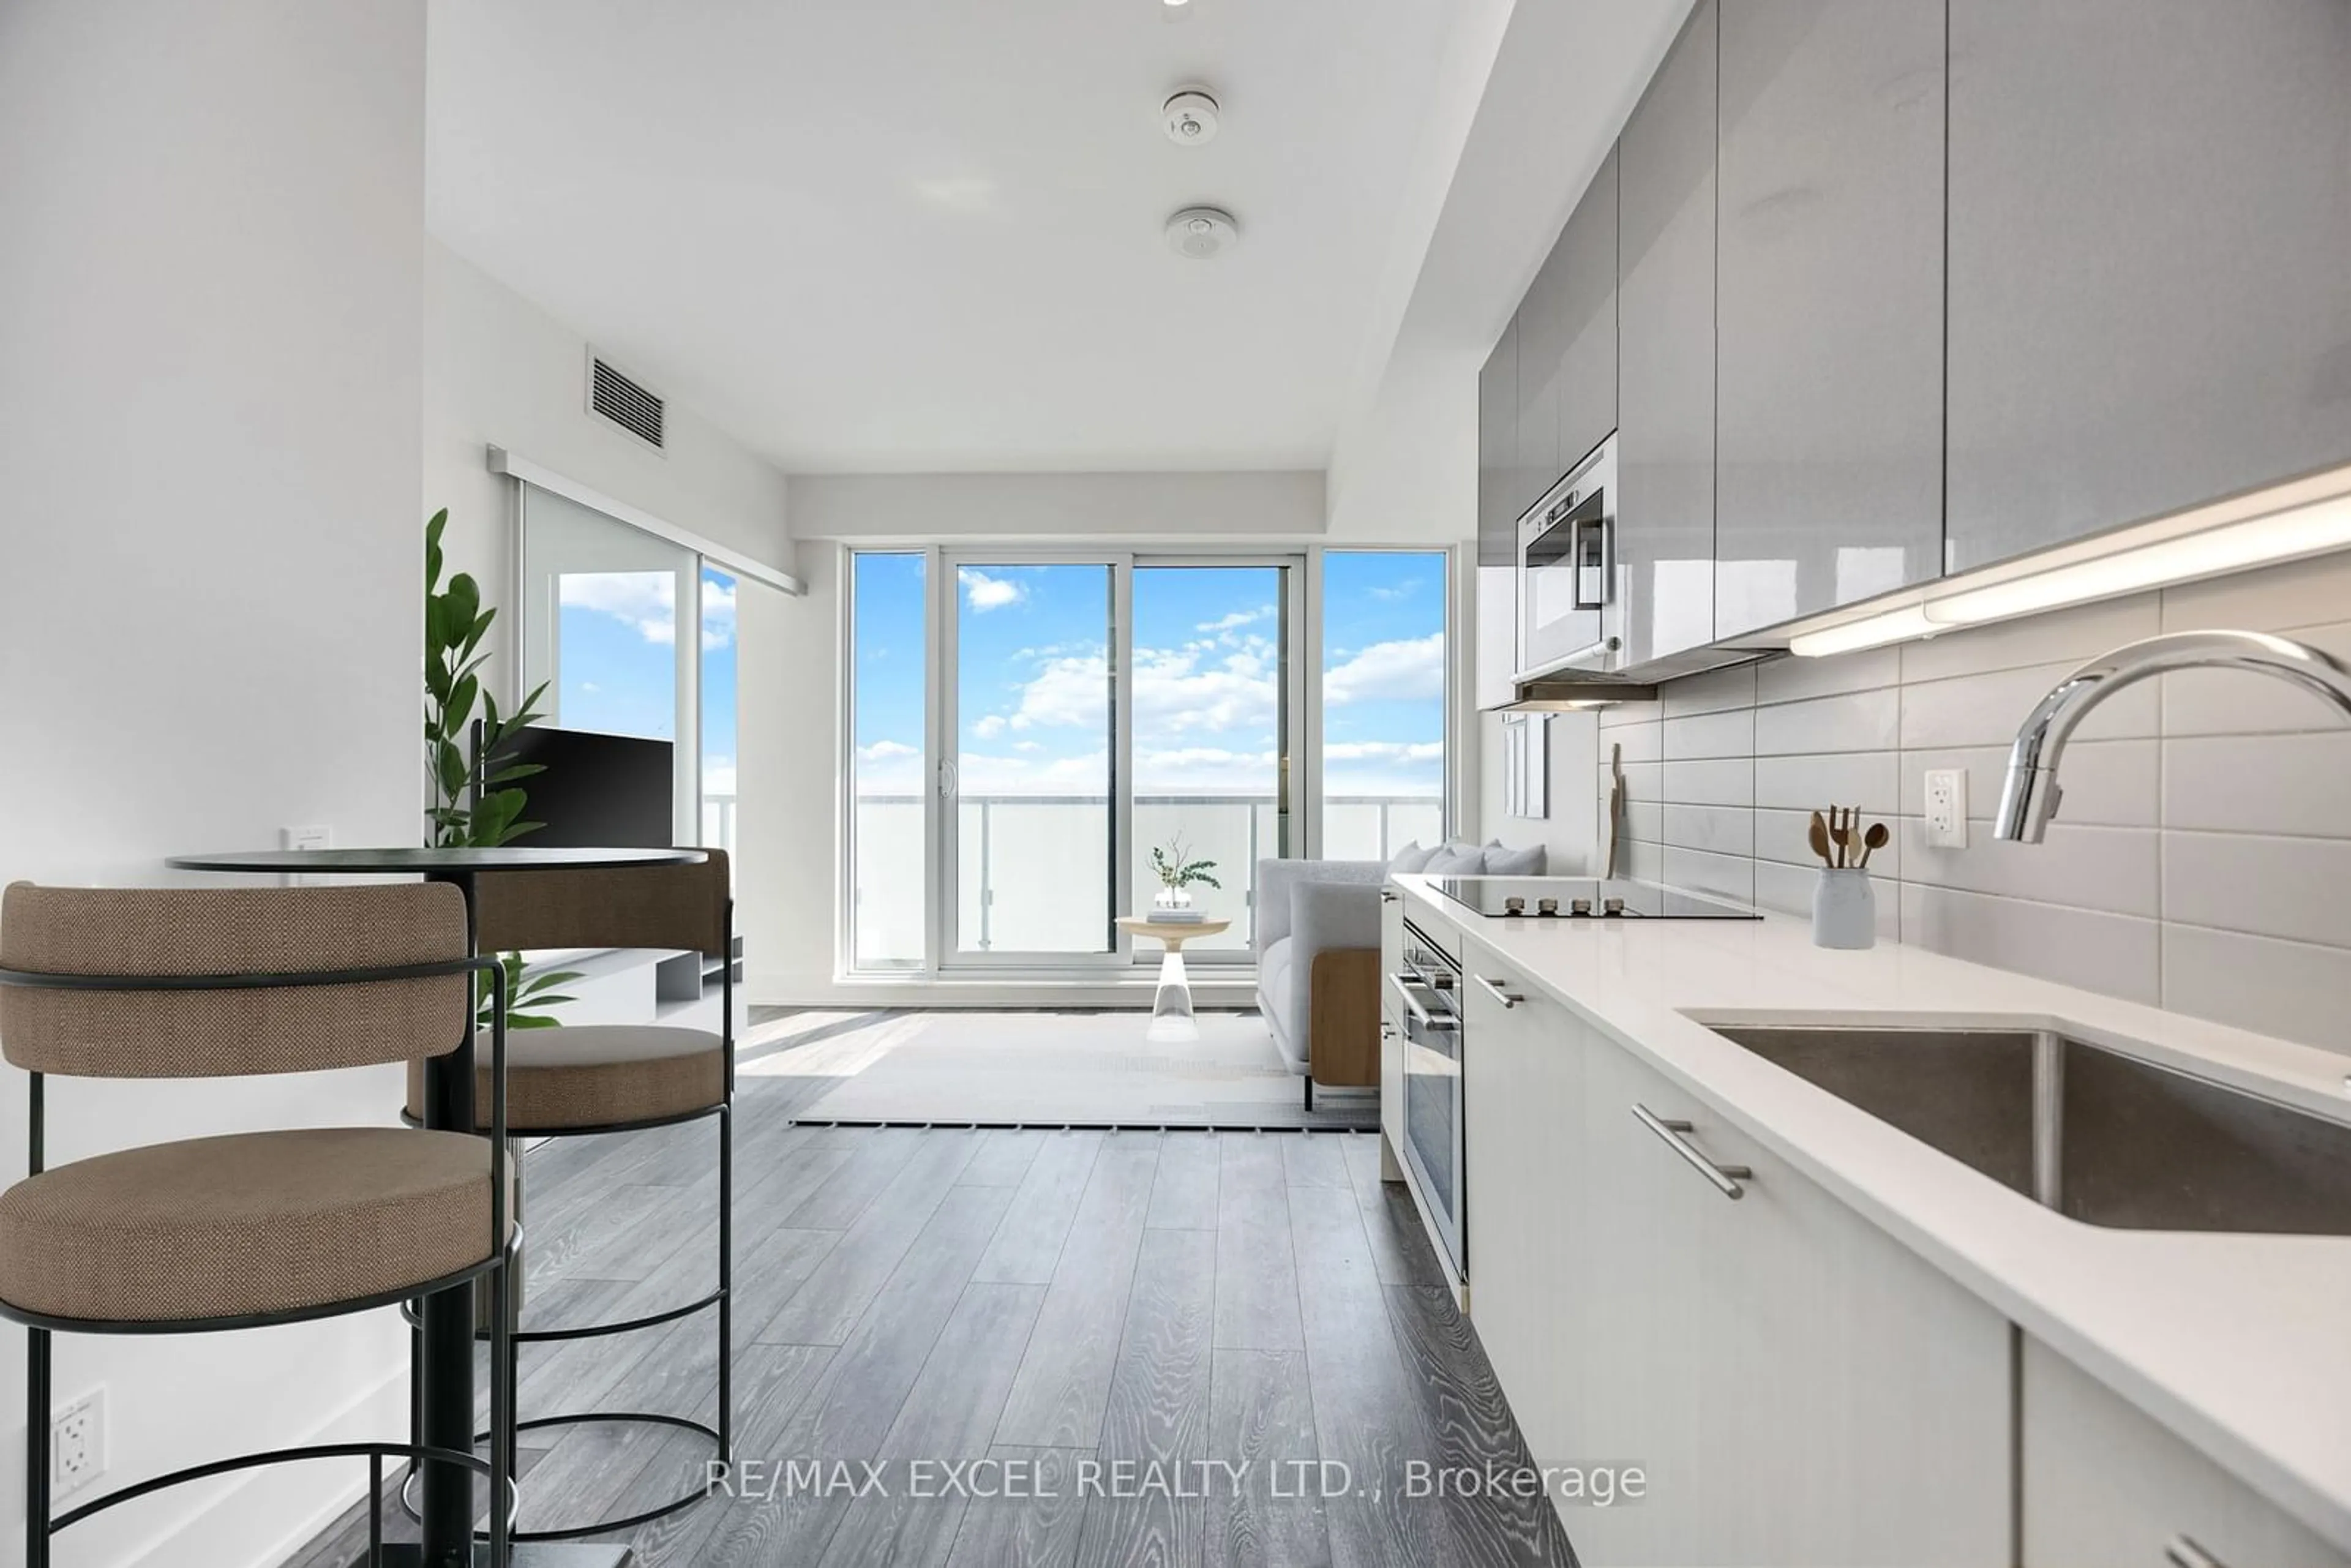 Contemporary kitchen for 403 Church St #4110, Toronto Ontario M4Y 0C9